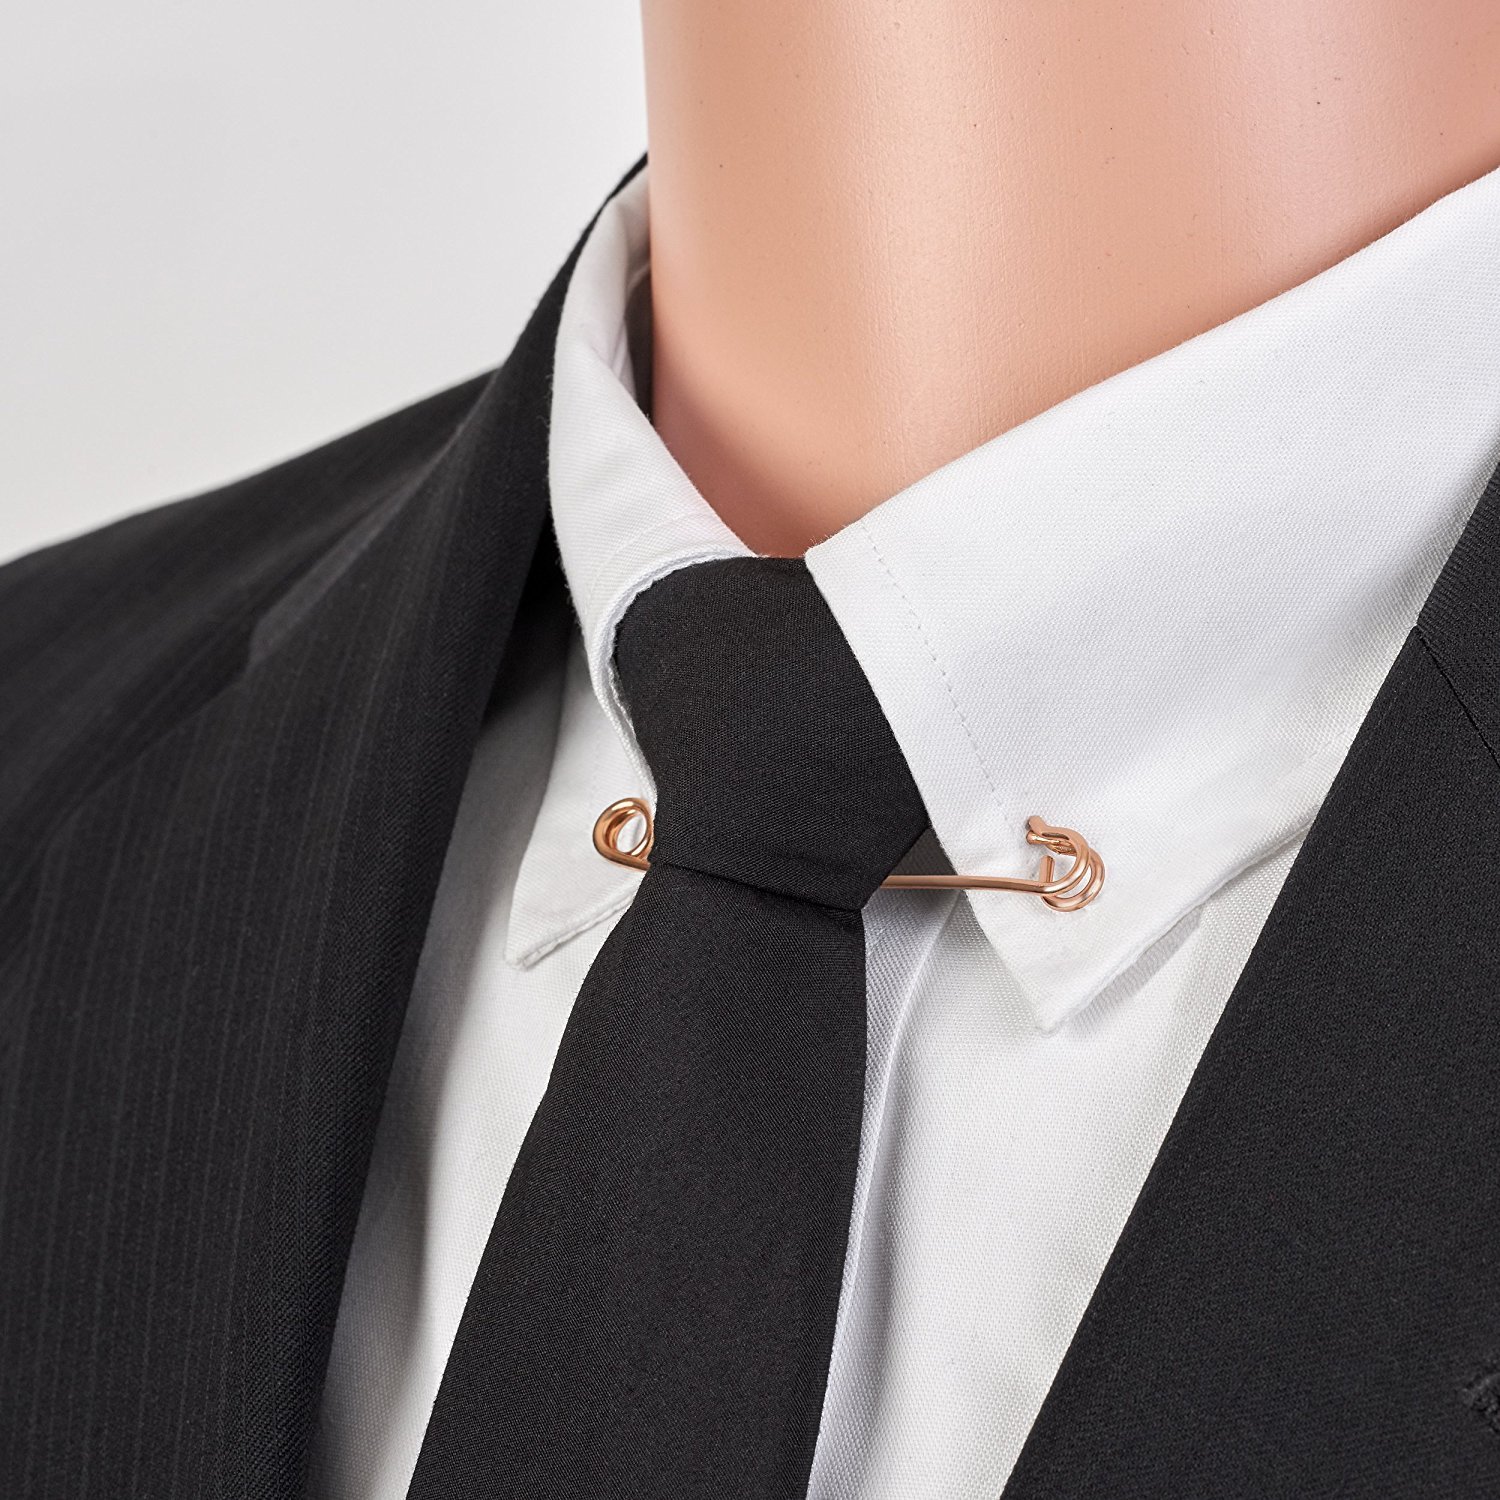 VVCome 3PCS Men's Classic Brass Shirt Collar Bar Tie Pins Set for Wedding Business with Gift Box 